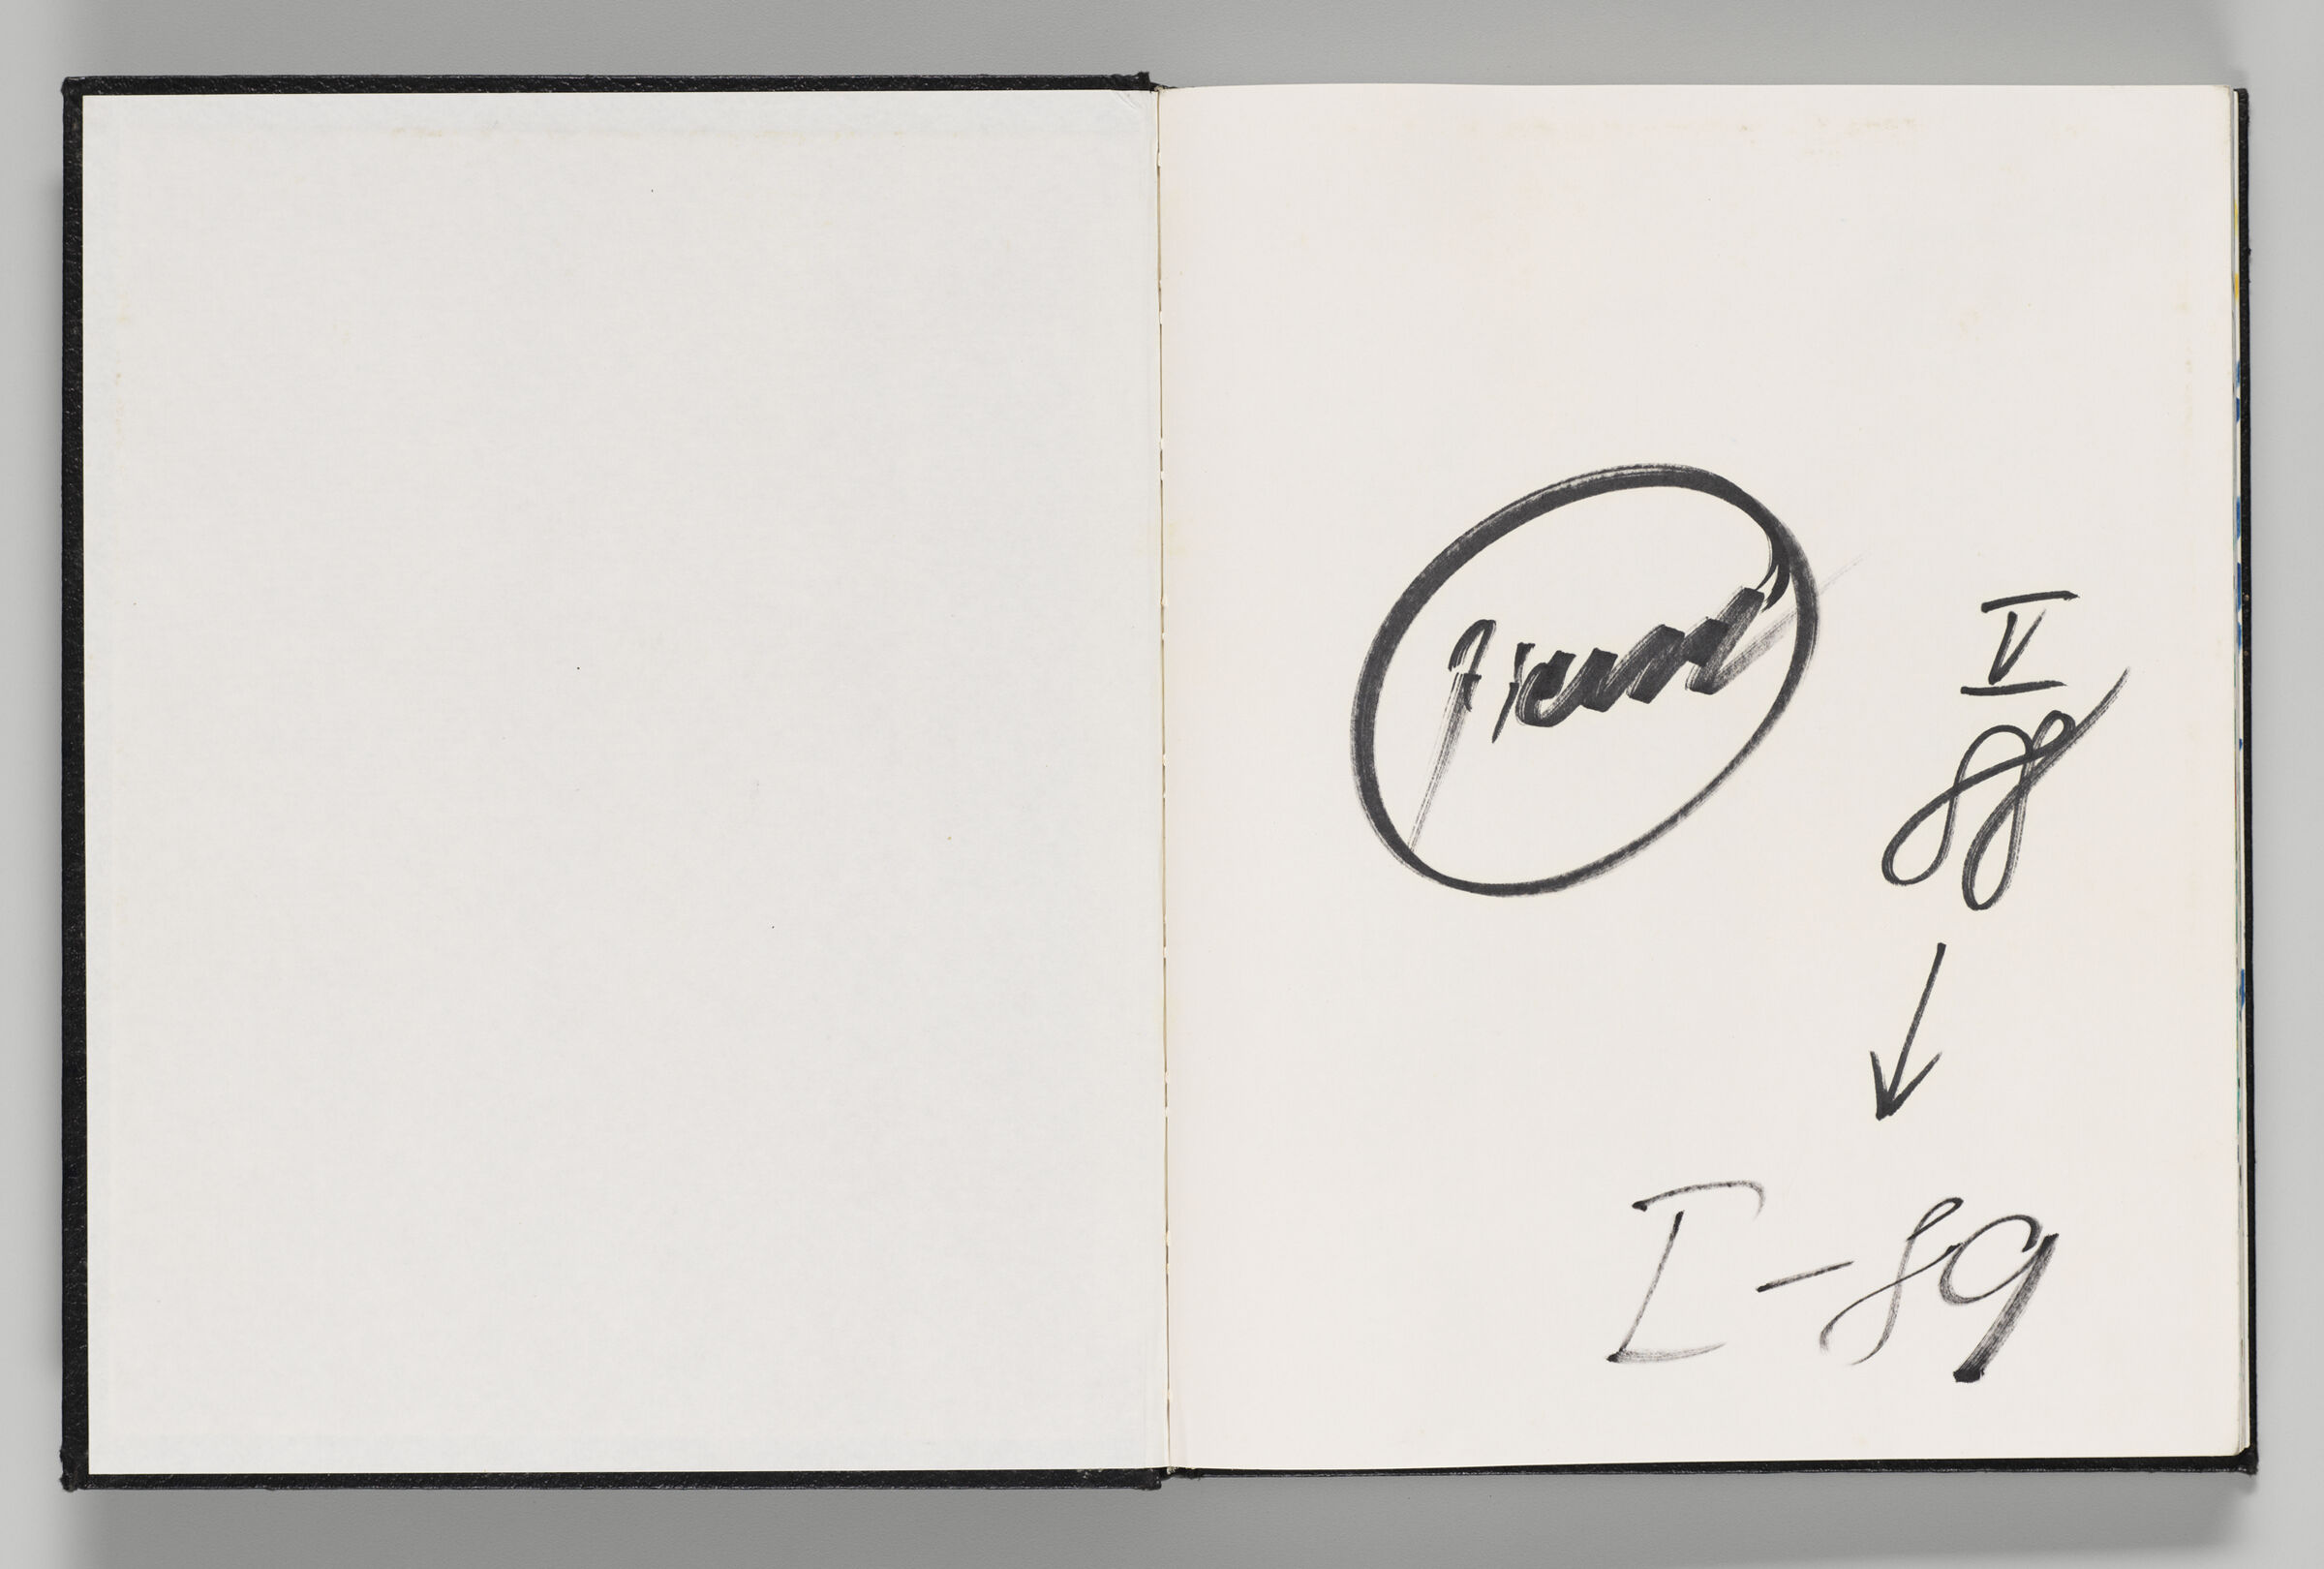 Untitled (Front Endpaper, Left Page); Untitled (Signature, Right Page)